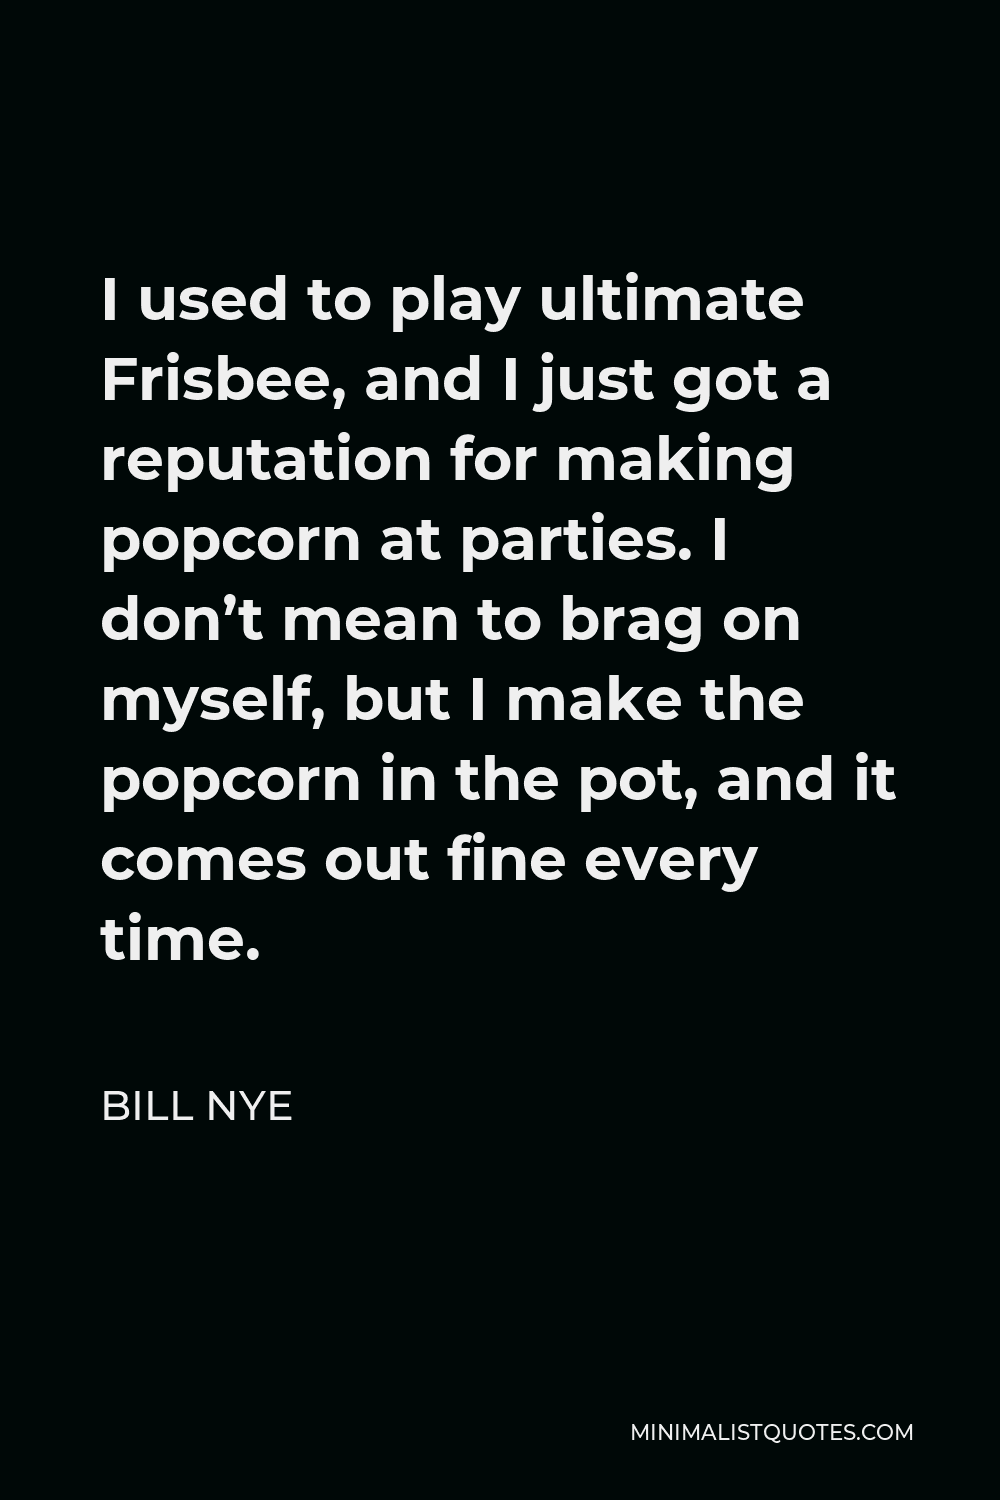 Bill Nye Quote - I used to play ultimate Frisbee, and I just got a reputation for making popcorn at parties. I don’t mean to brag on myself, but I make the popcorn in the pot, and it comes out fine every time.